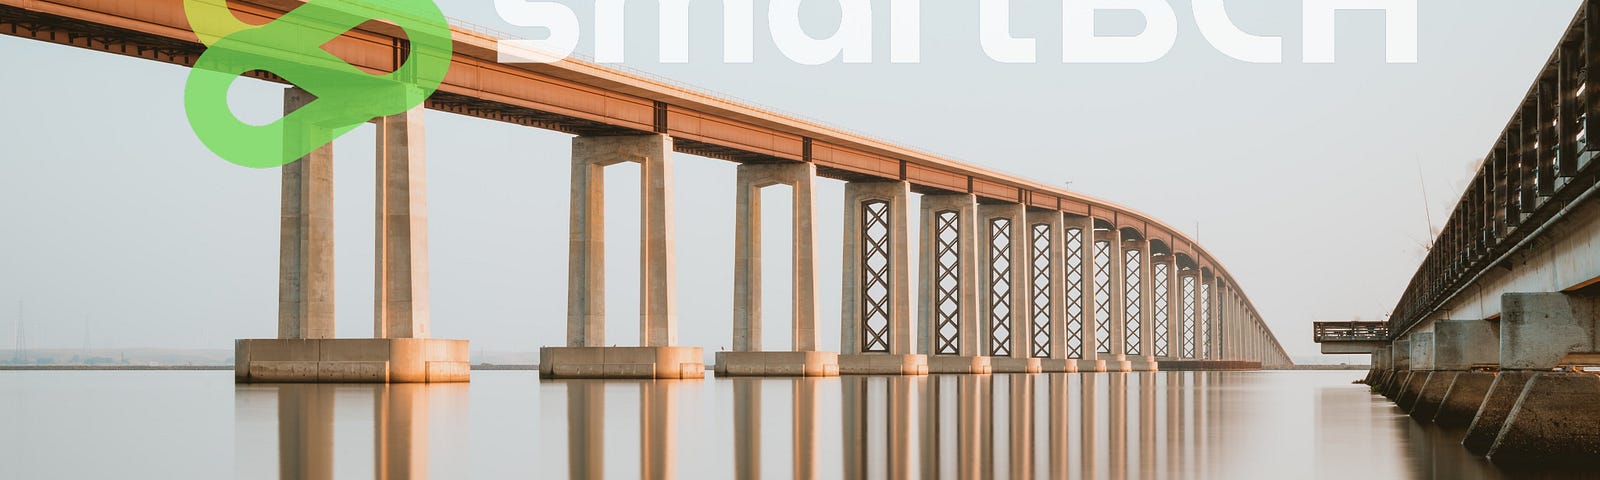 Image of two bridges crossing the sea. Added logos of smartbch, prompt.cash and wagon.cash